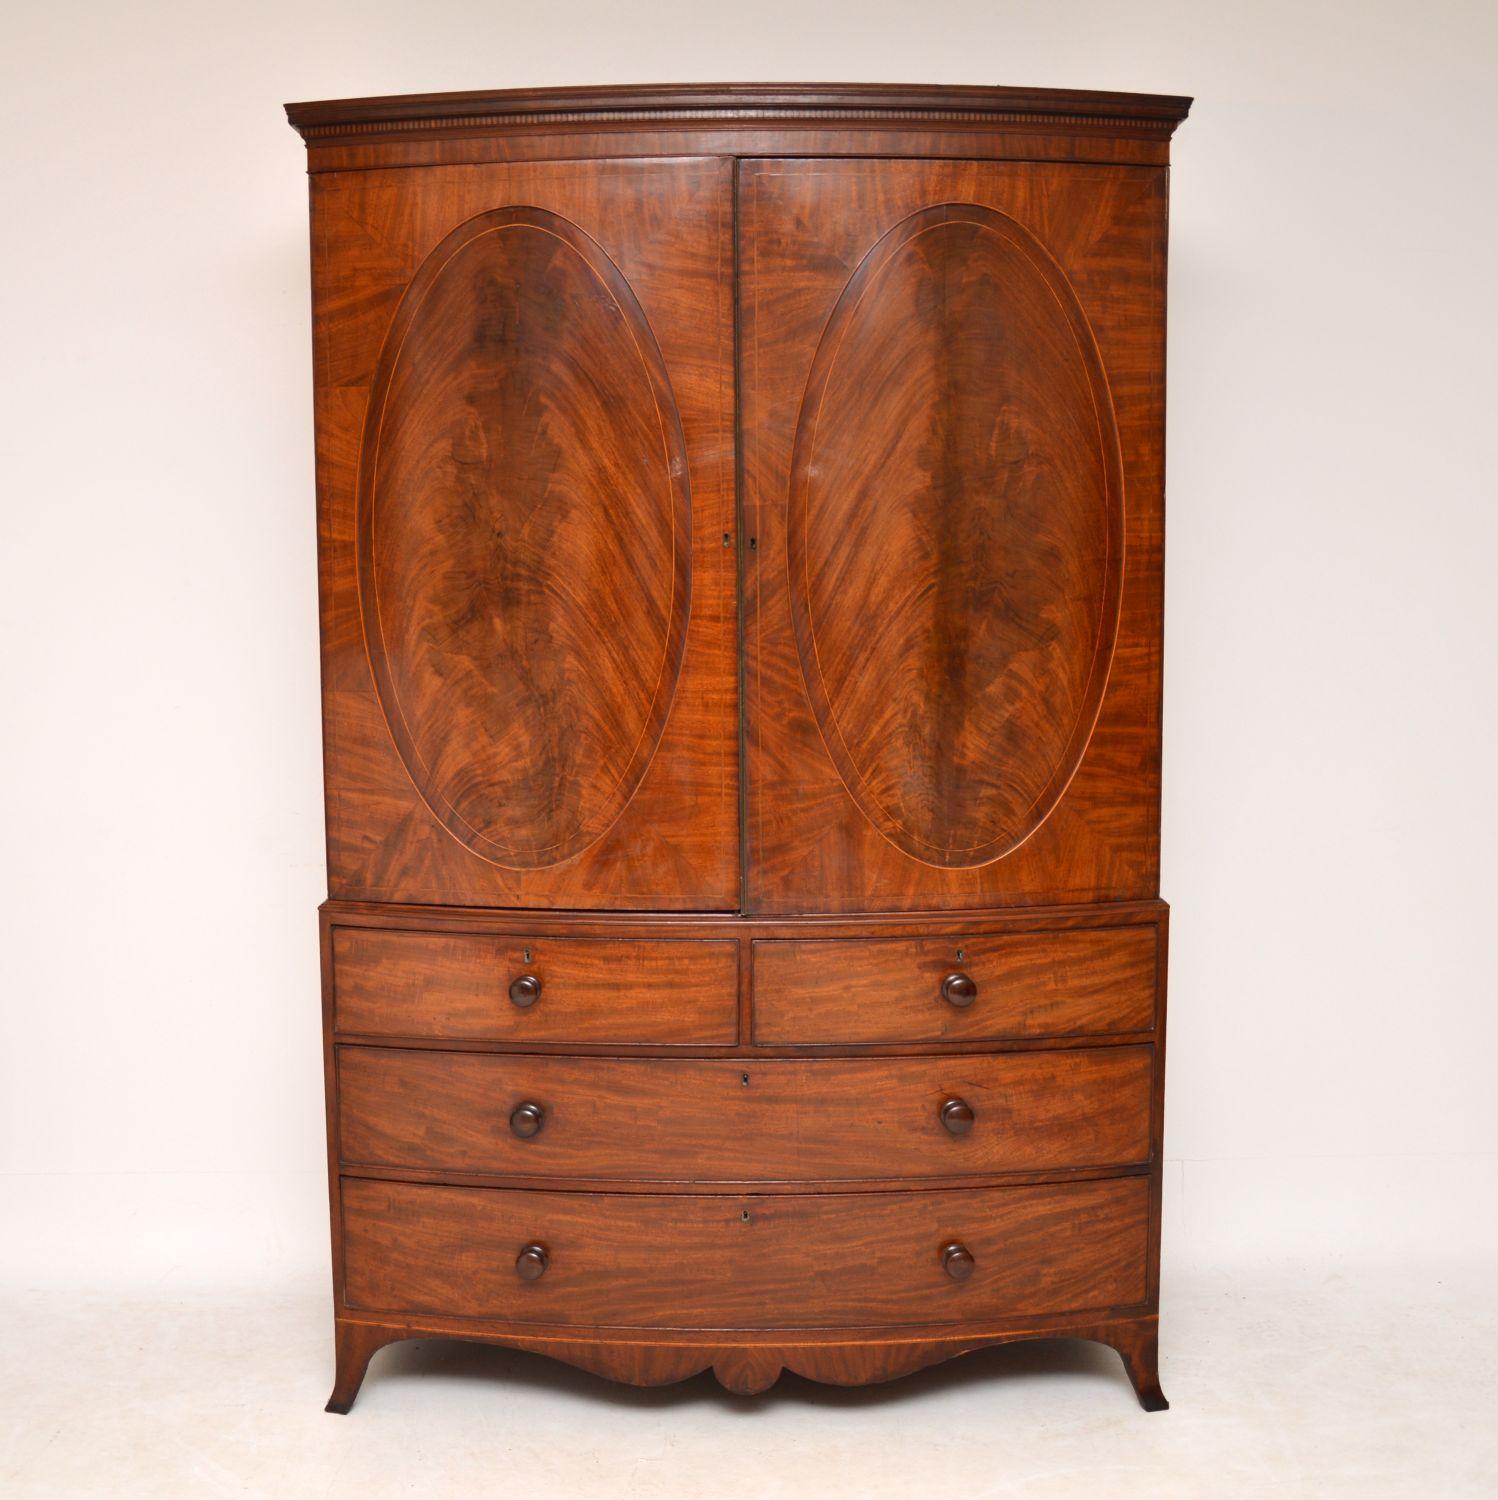 Very impressive antique George III mahogany Linen Press Dating from circa 1800 period and in very good condition. Its bow fronted, with oval flame mahogany panels on the top cupboards and it still has the original brass beading on the door. There